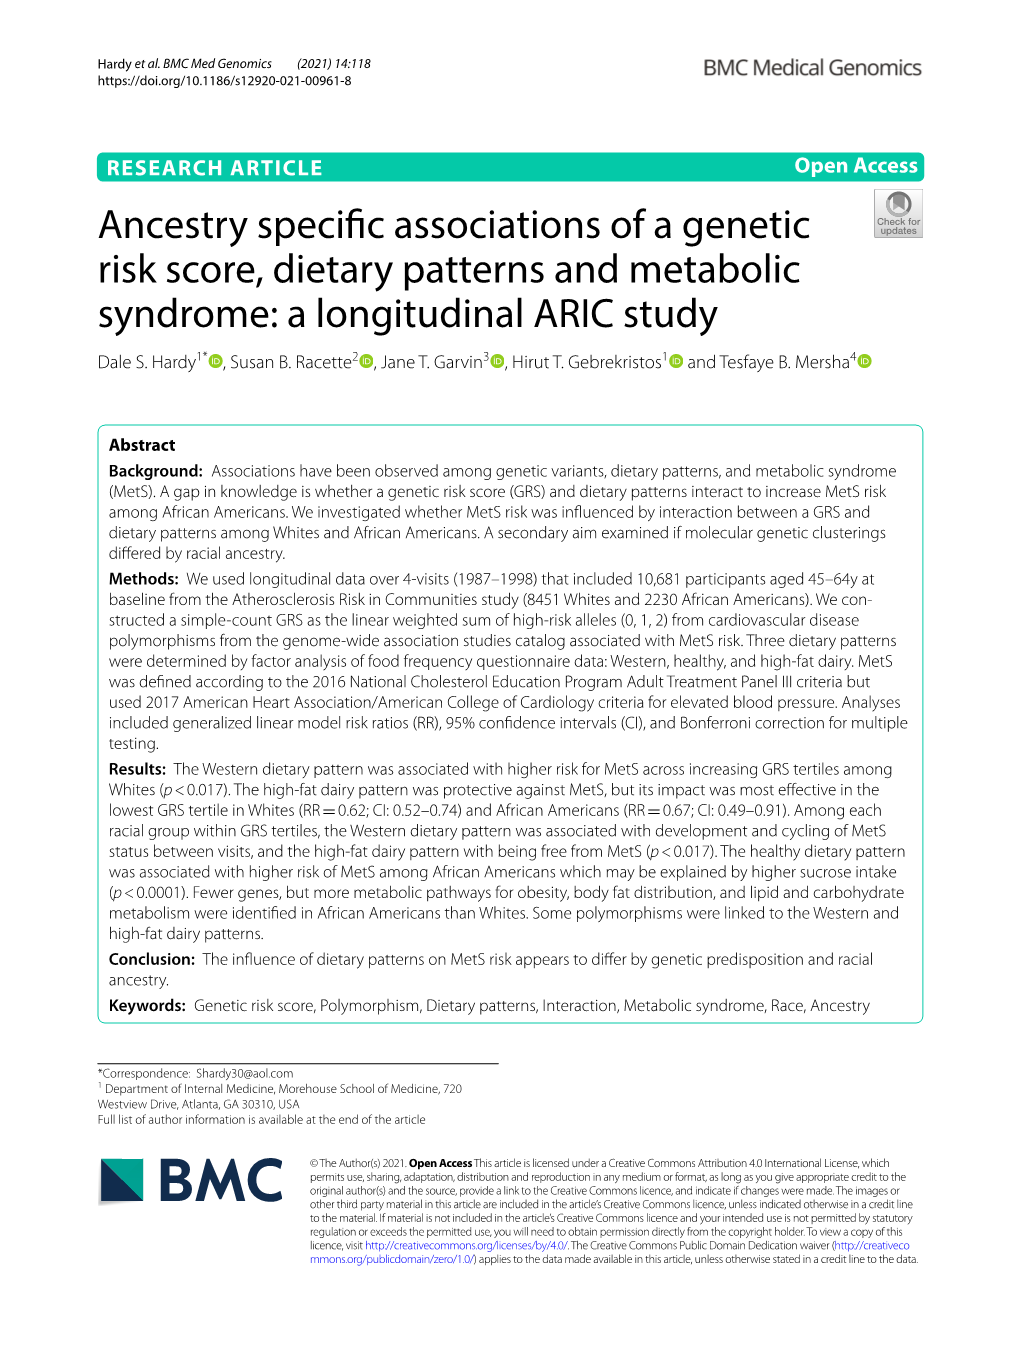 Ancestry Specific Associations of a Genetic